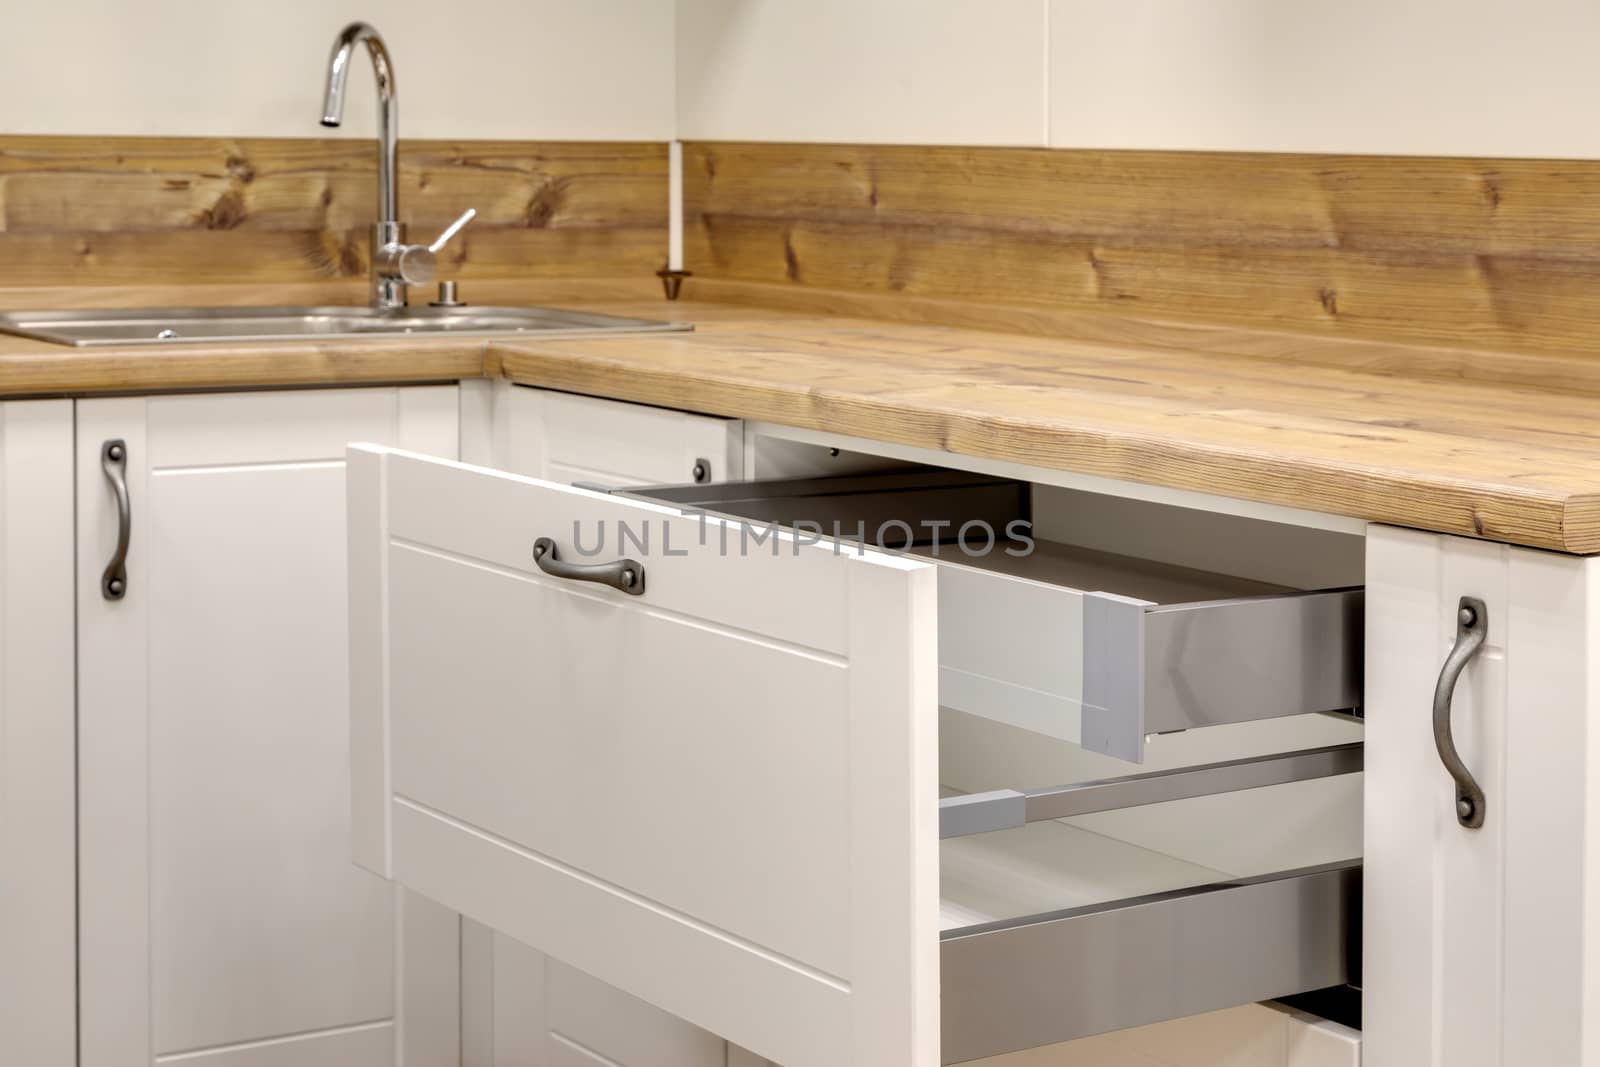 a kitchen interior with drawers by sveter